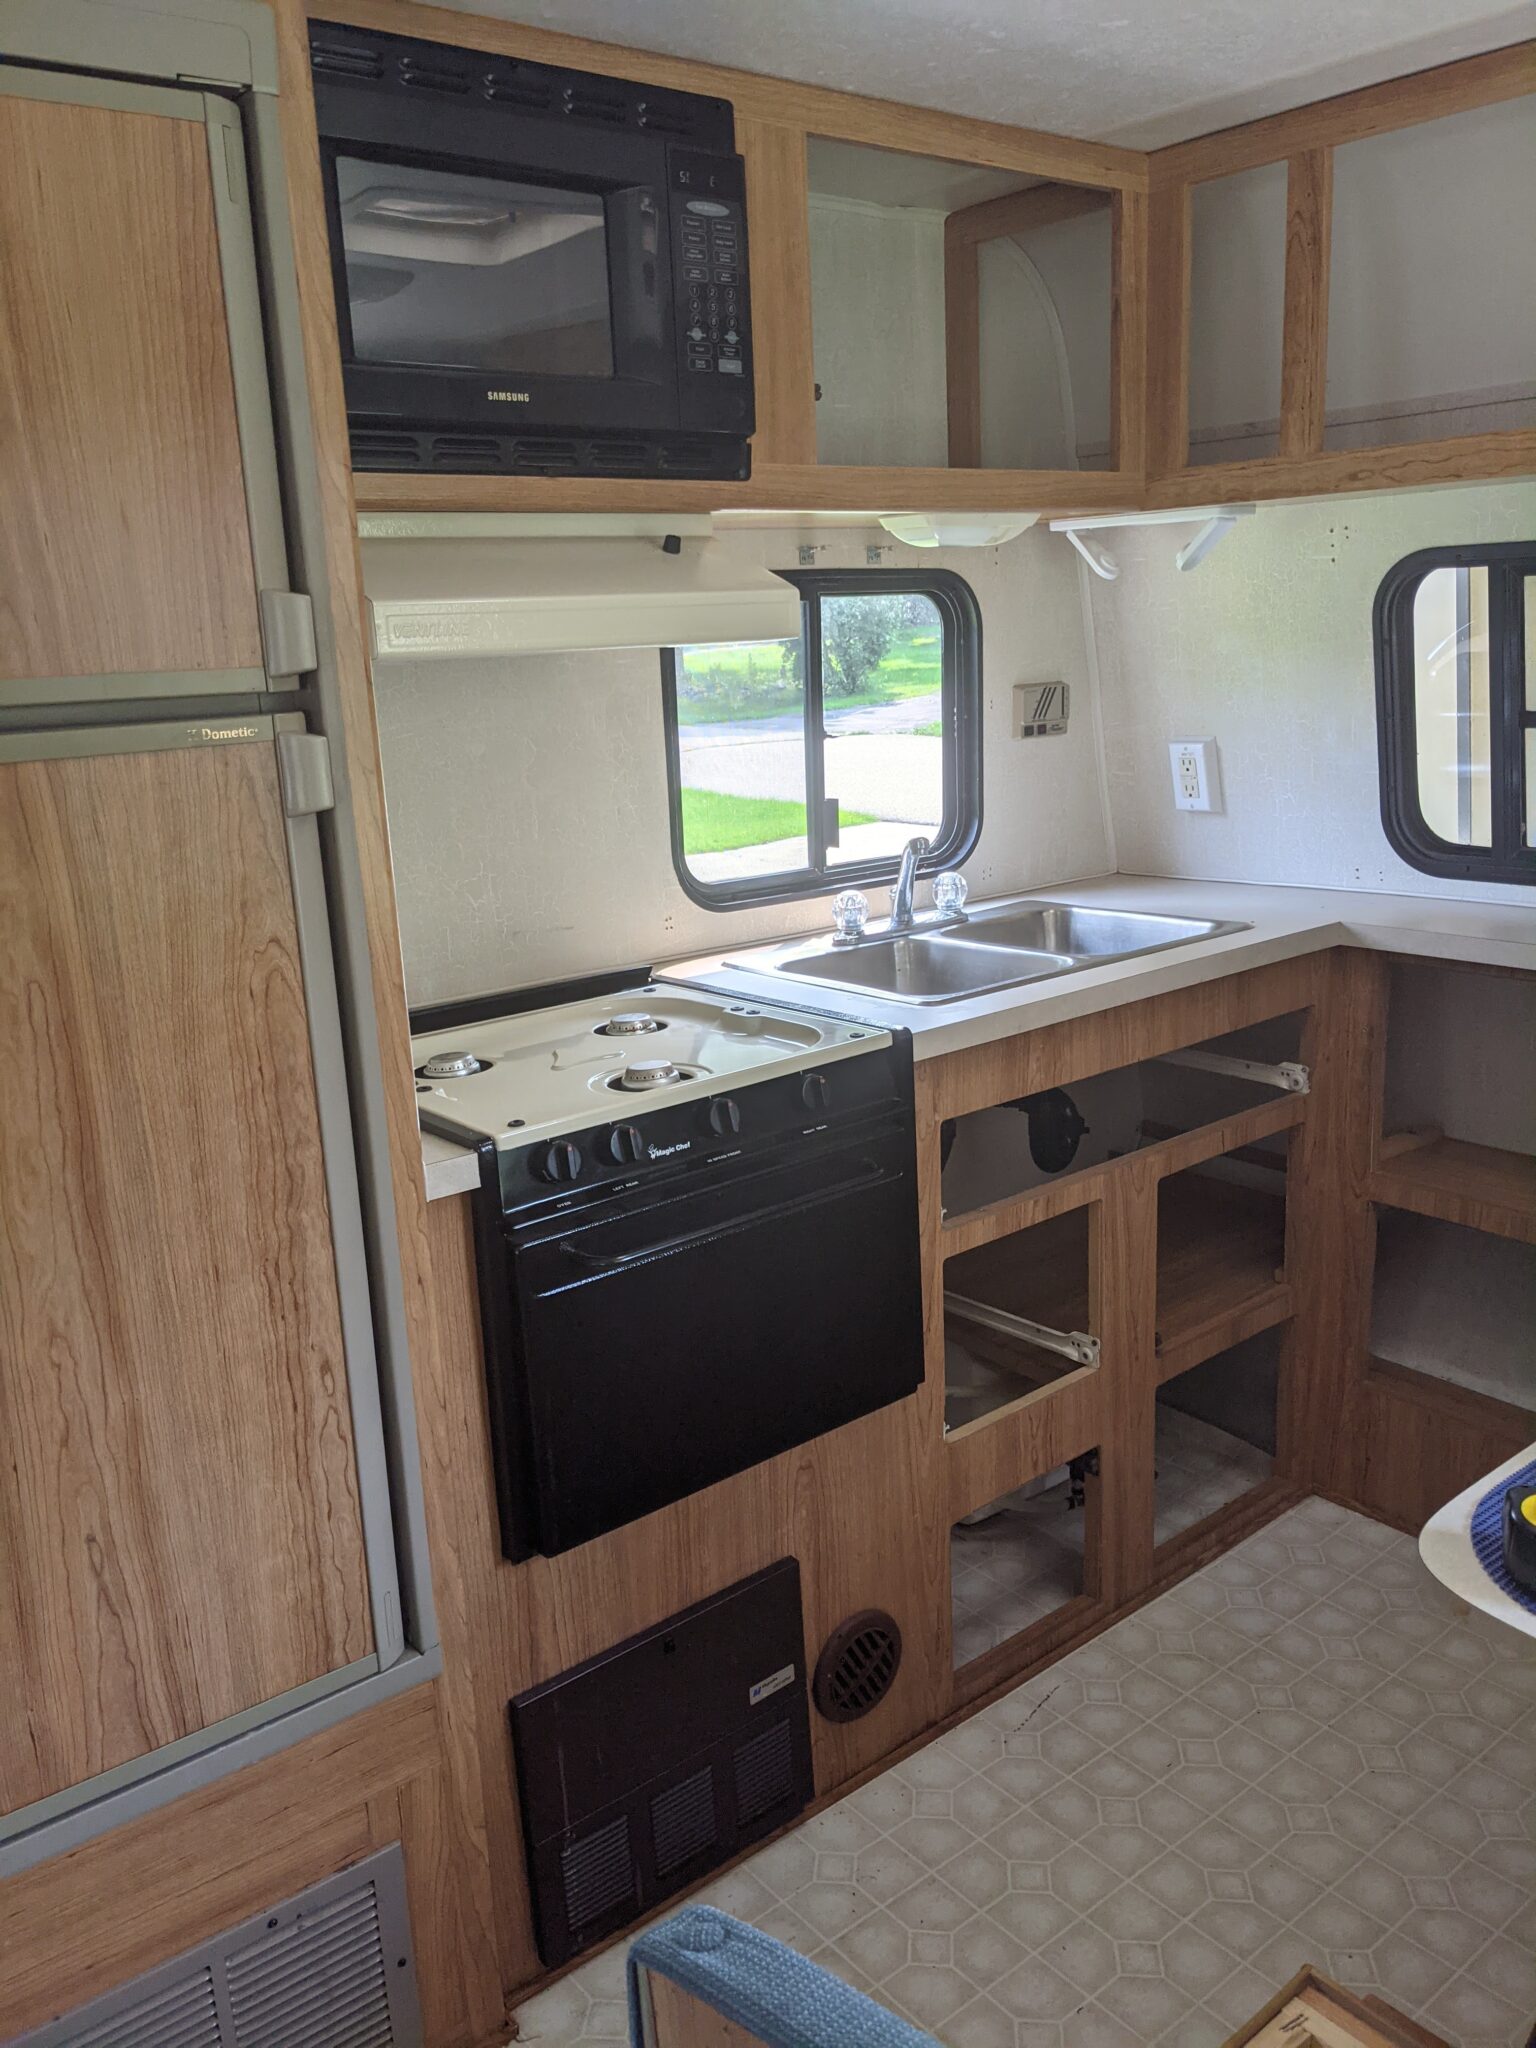 How To Paint Rv Cabinets The Right Way, What Kind Of Paint To Use On Rv Cabinets